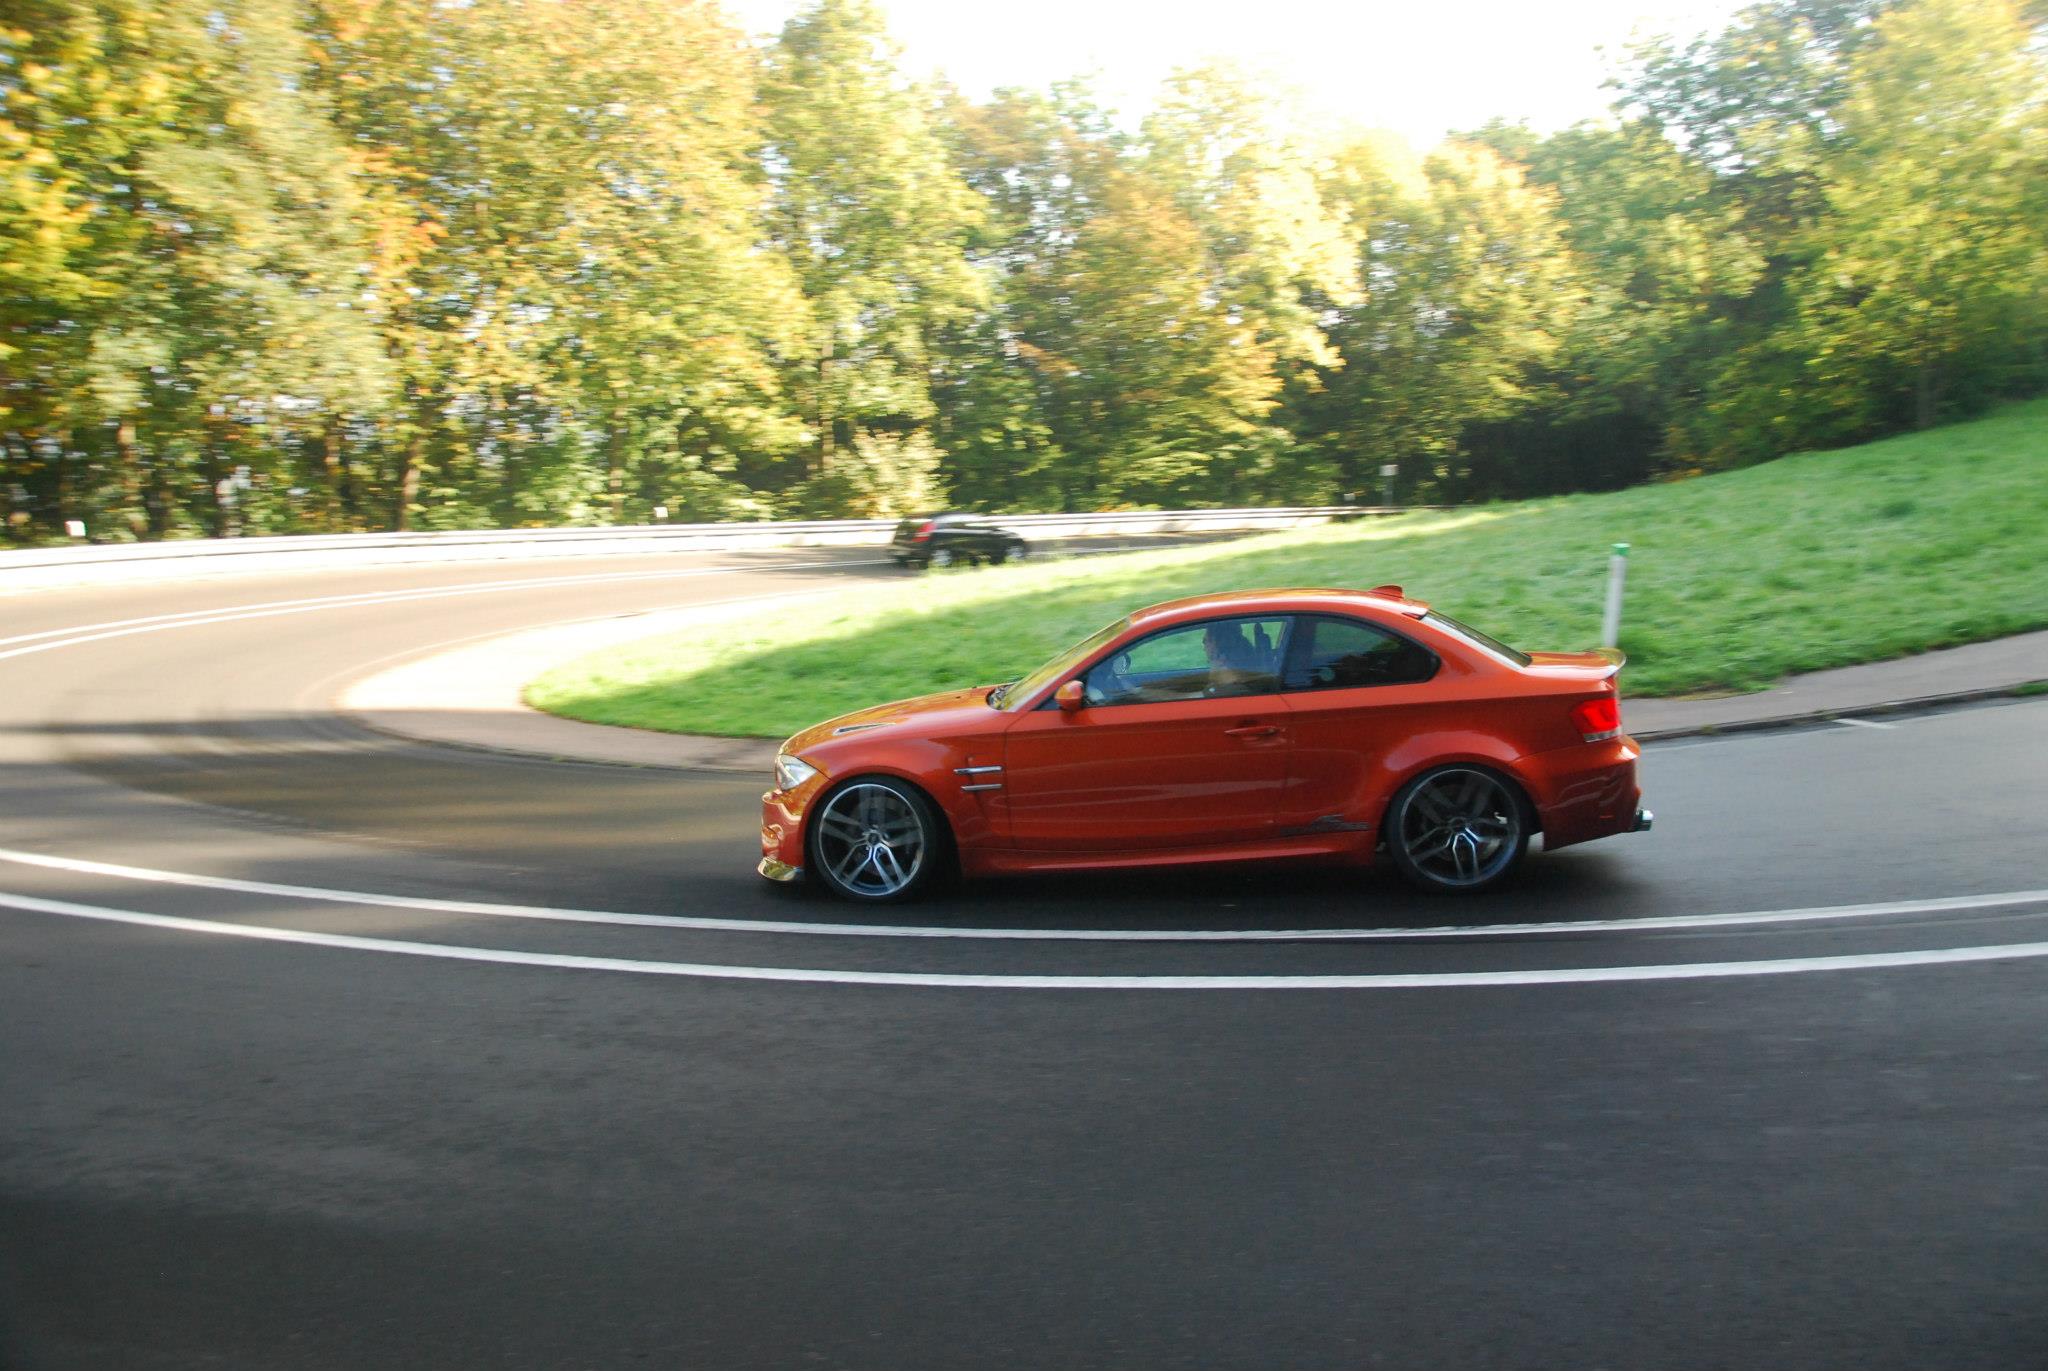 2012, Ac schnitzer, Bmw, 1 series, M coupe, Coupe, Tuning Wallpaper